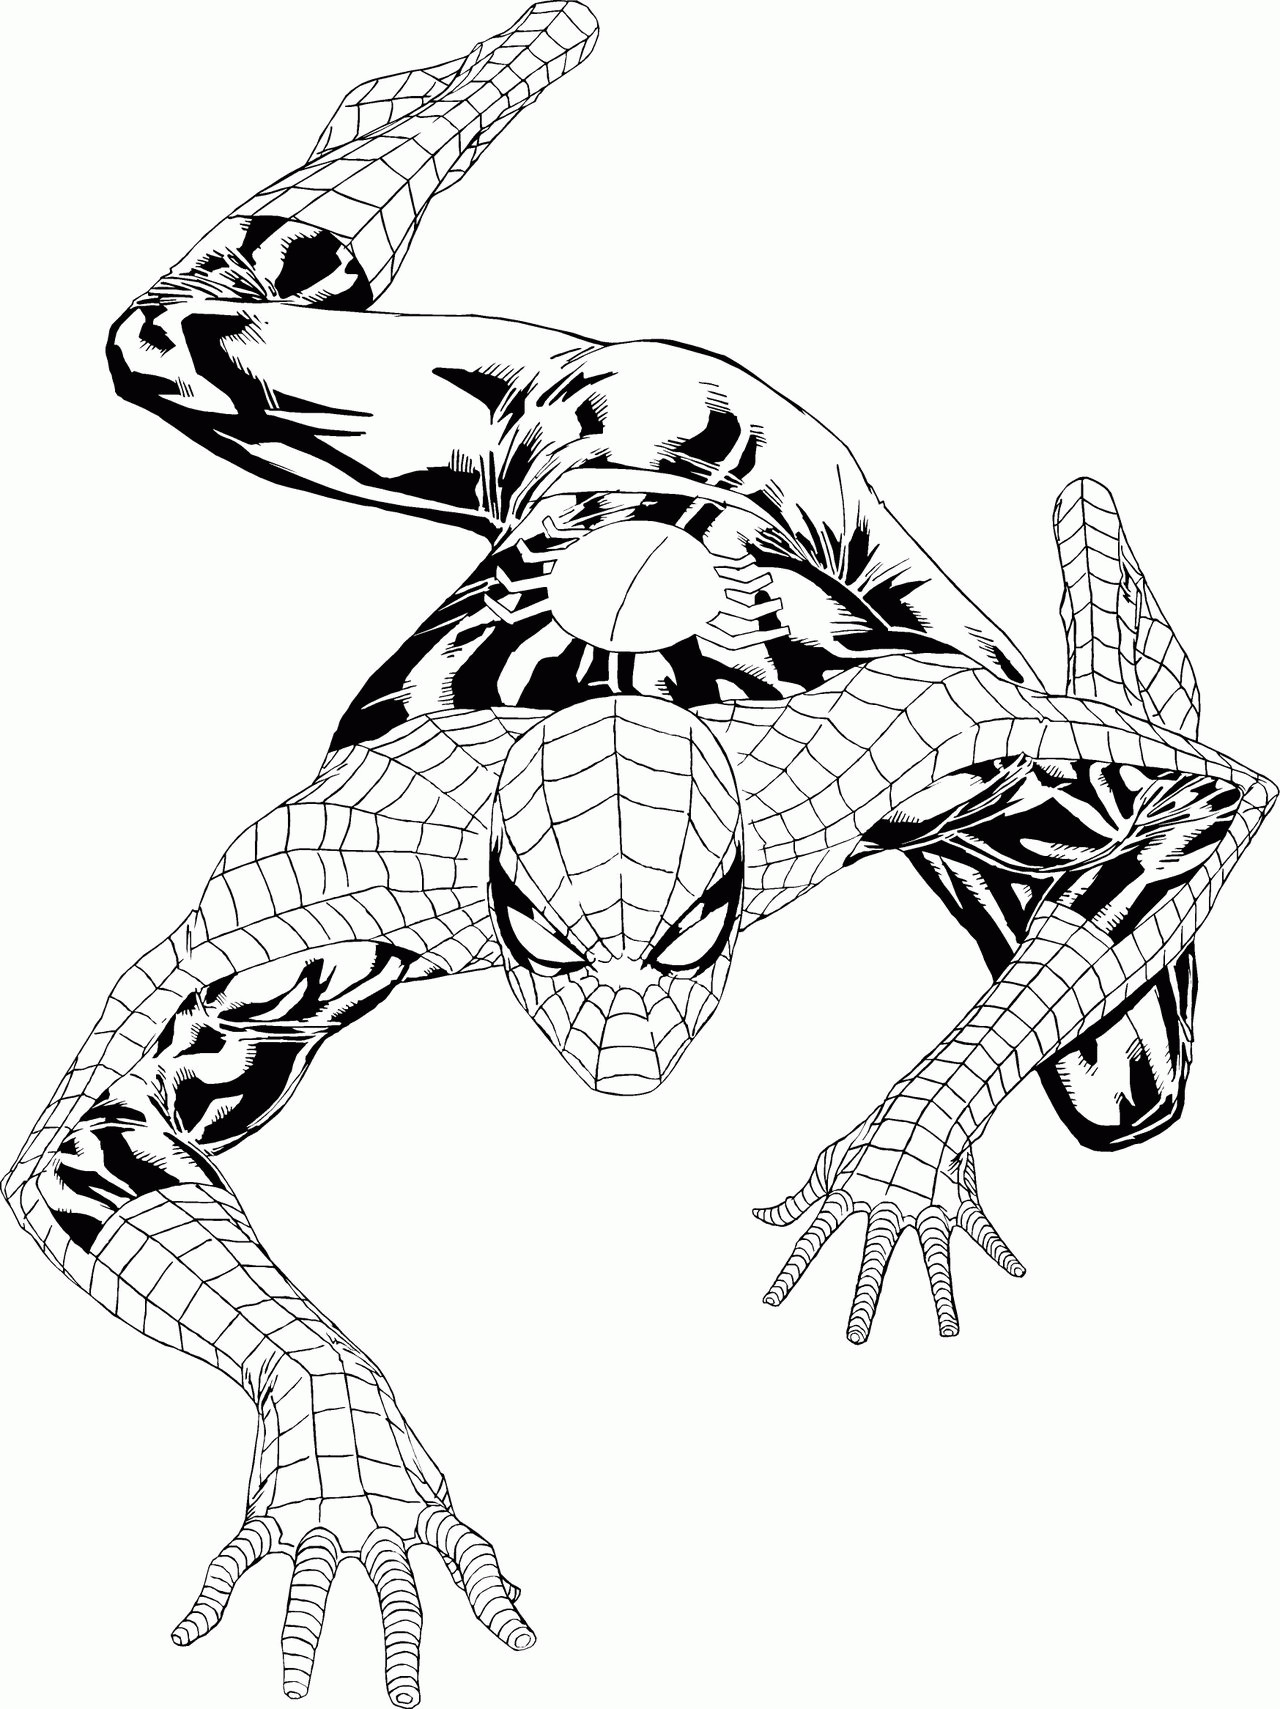 Spiderman Coloring Pages For Toddlers
 The Amazing Spider Man Coloring Pages Coloring Home